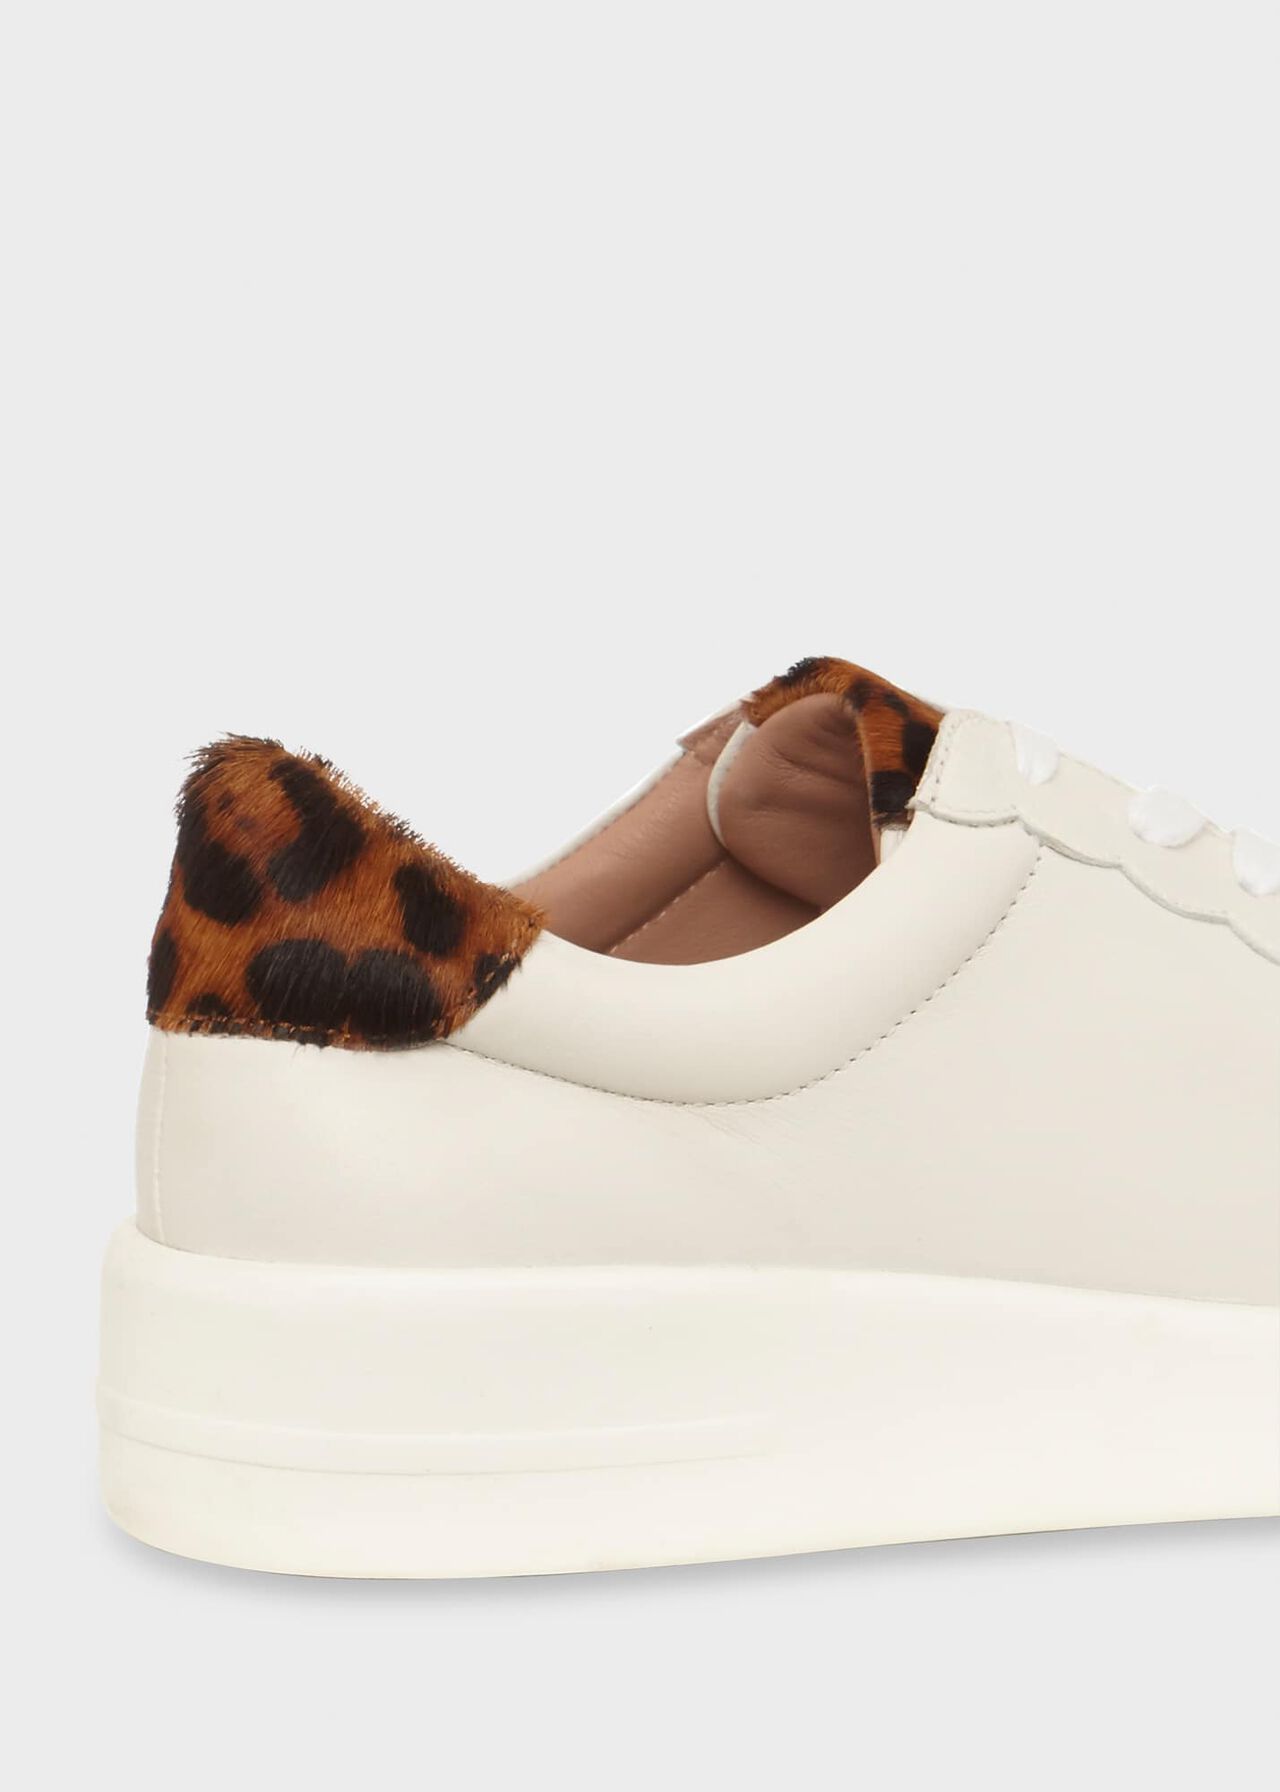 Mollie Sneakers, White Leopard, hi-res